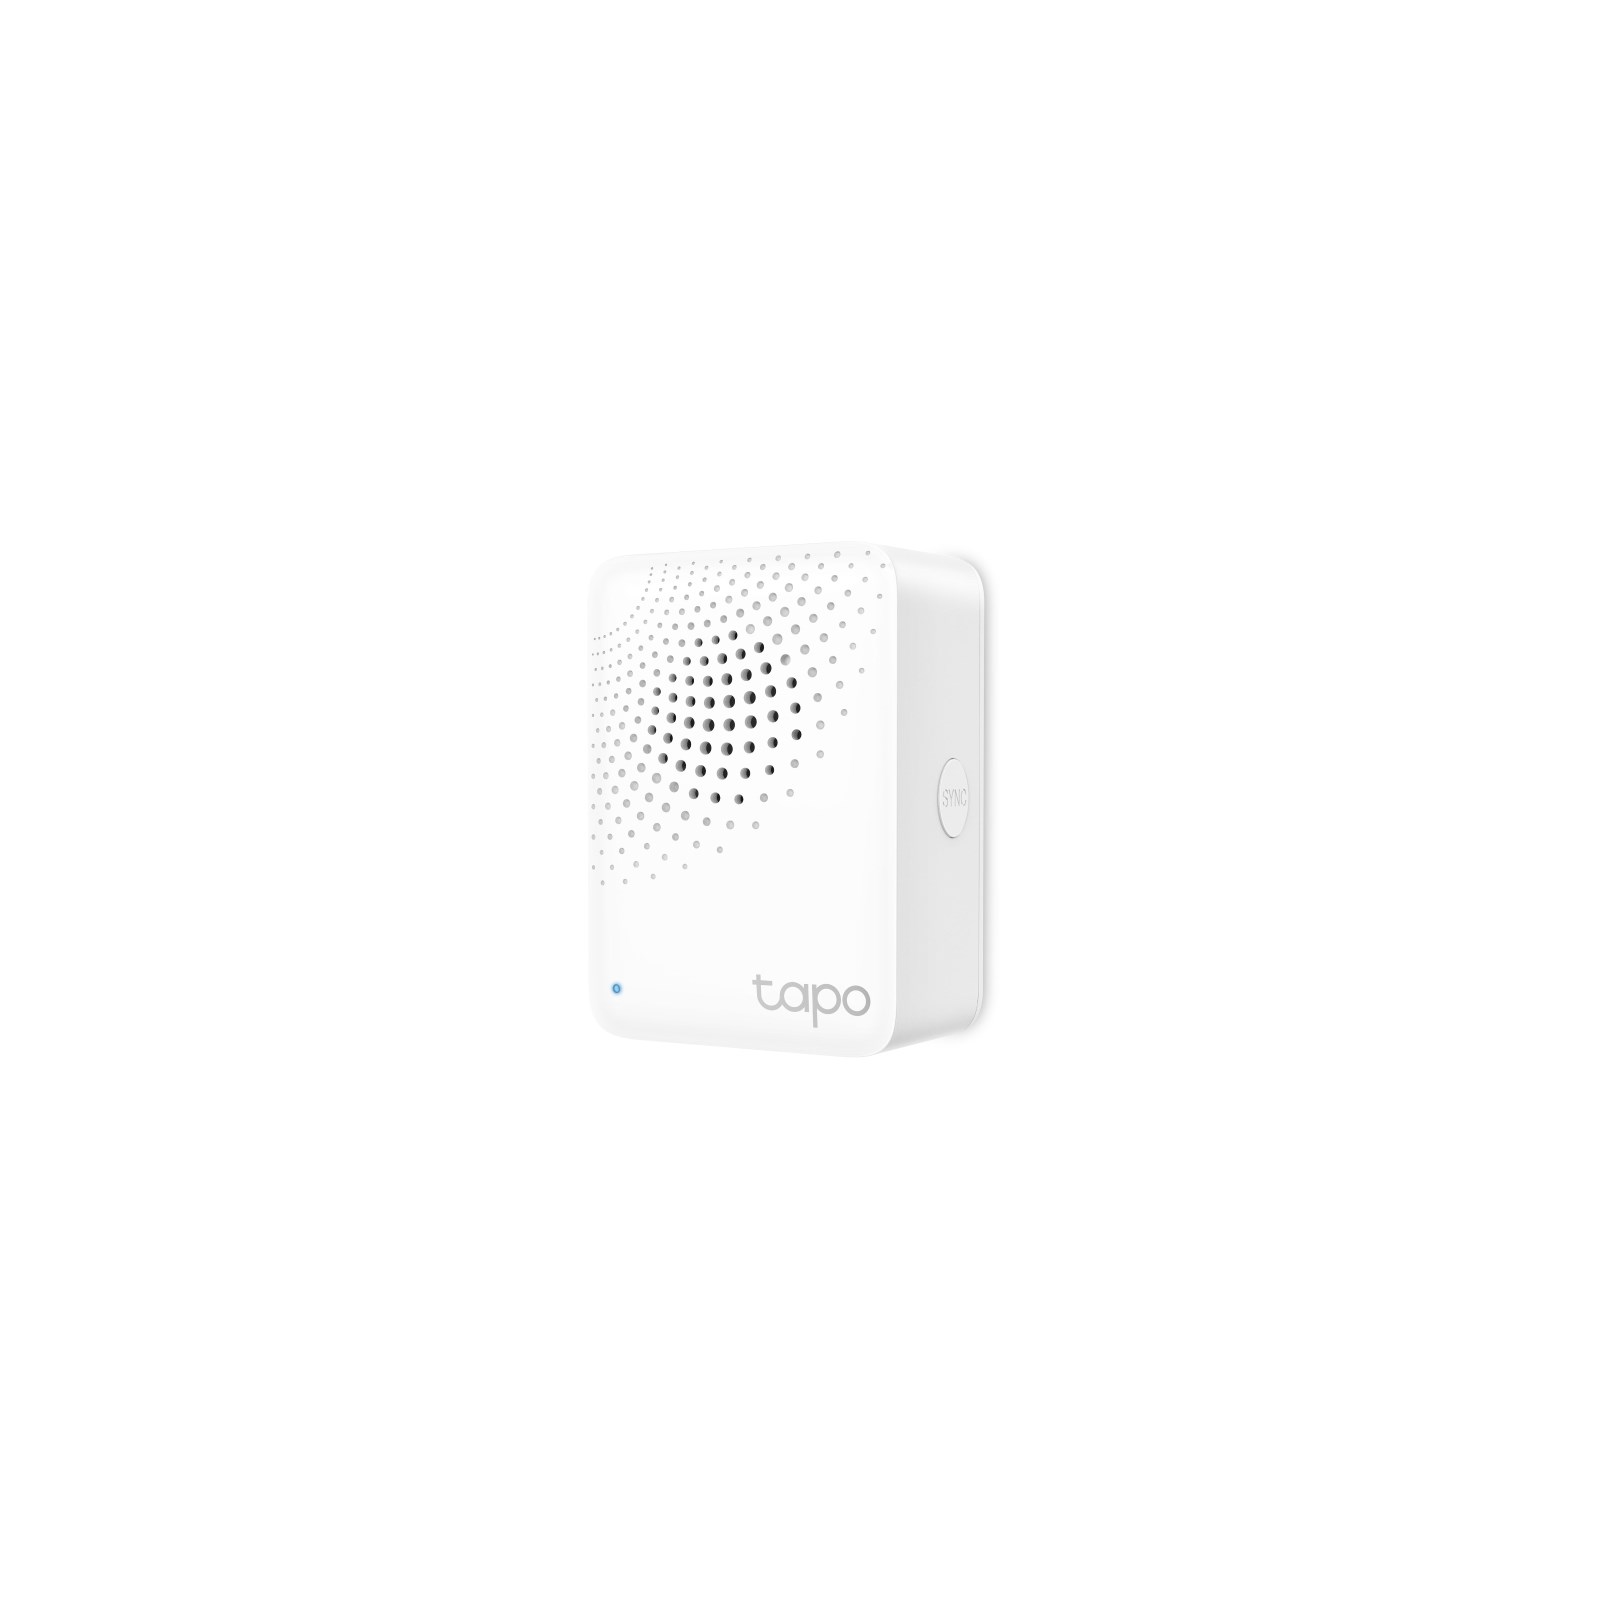 TP-LINK S200B SMART BUTTON FOR H100 HUB - Linkqage